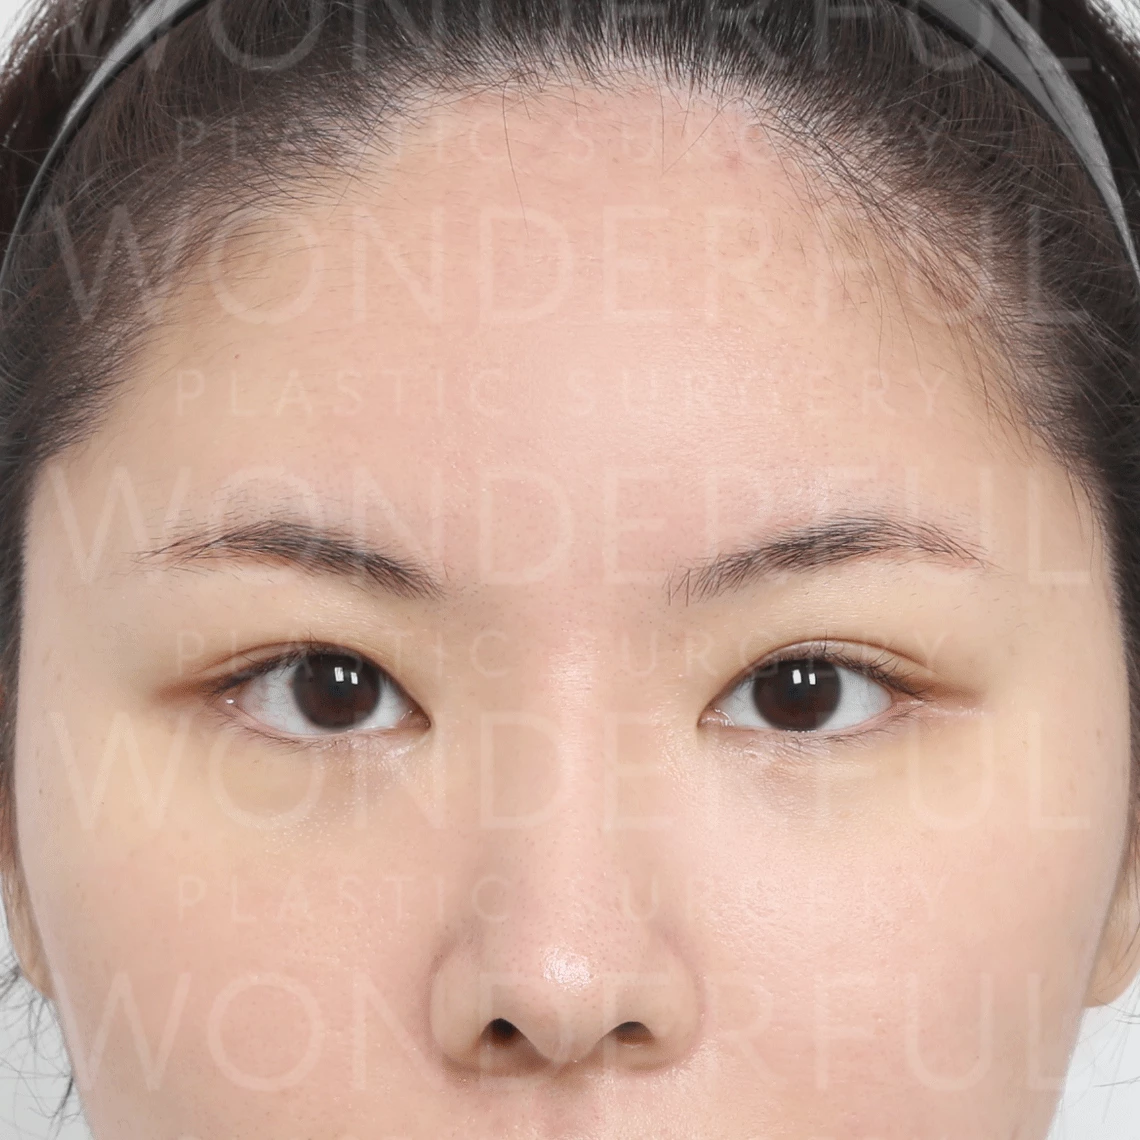 wonderful-plastic-surgery-hospital-korea-endoscopic-fore-head-lift-surgery-before-after-results-before-1